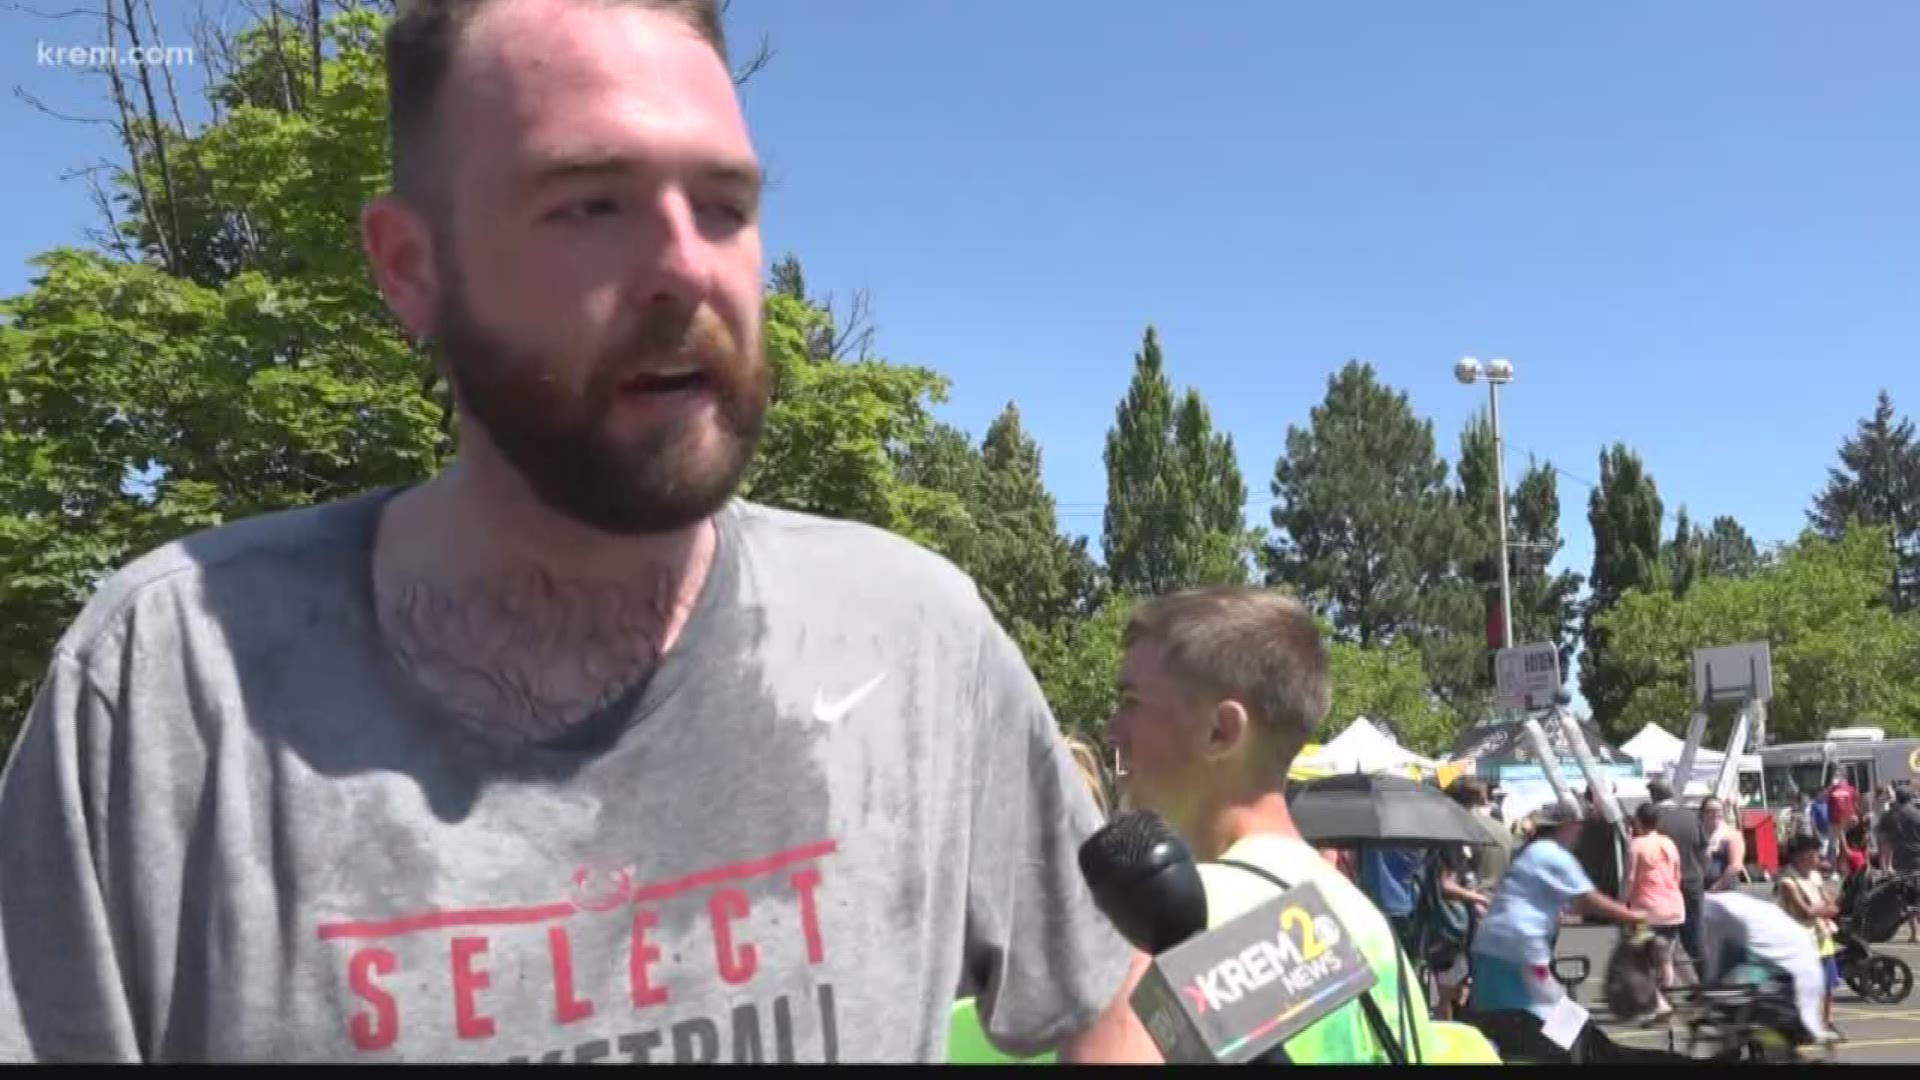 KREM's Casey Decker explores why there are two teams in Hoopfest 2019 with very, very similar names.